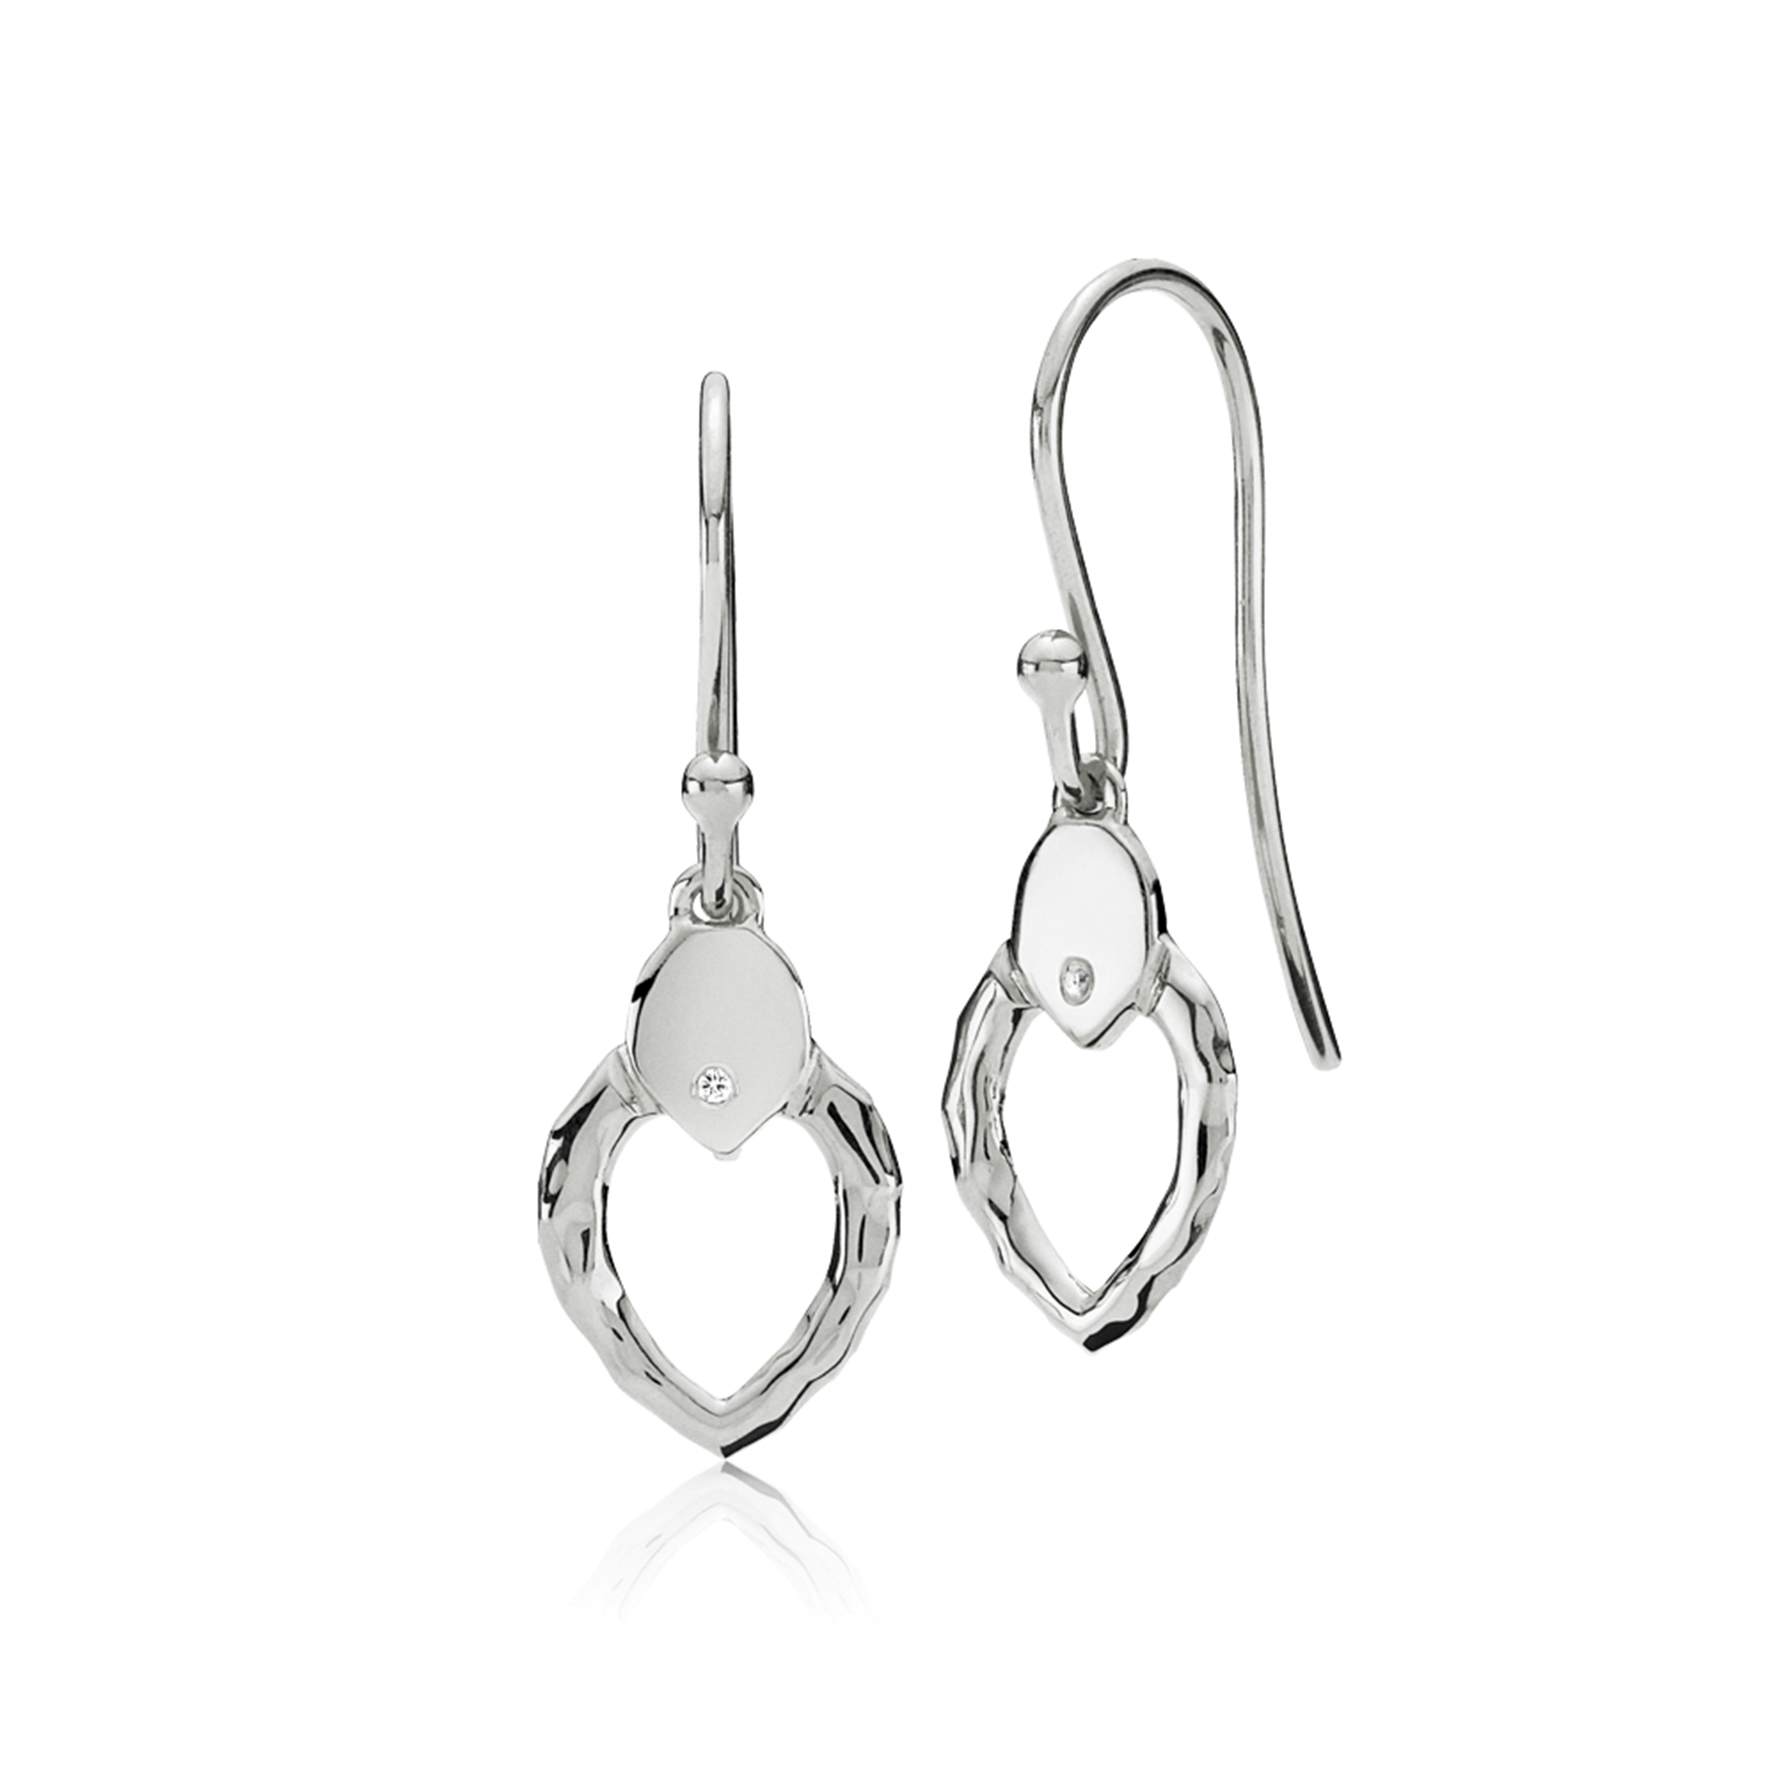 Cecilie Schmeichel Small Earrings from Izabel Camille in Silver Sterling 925